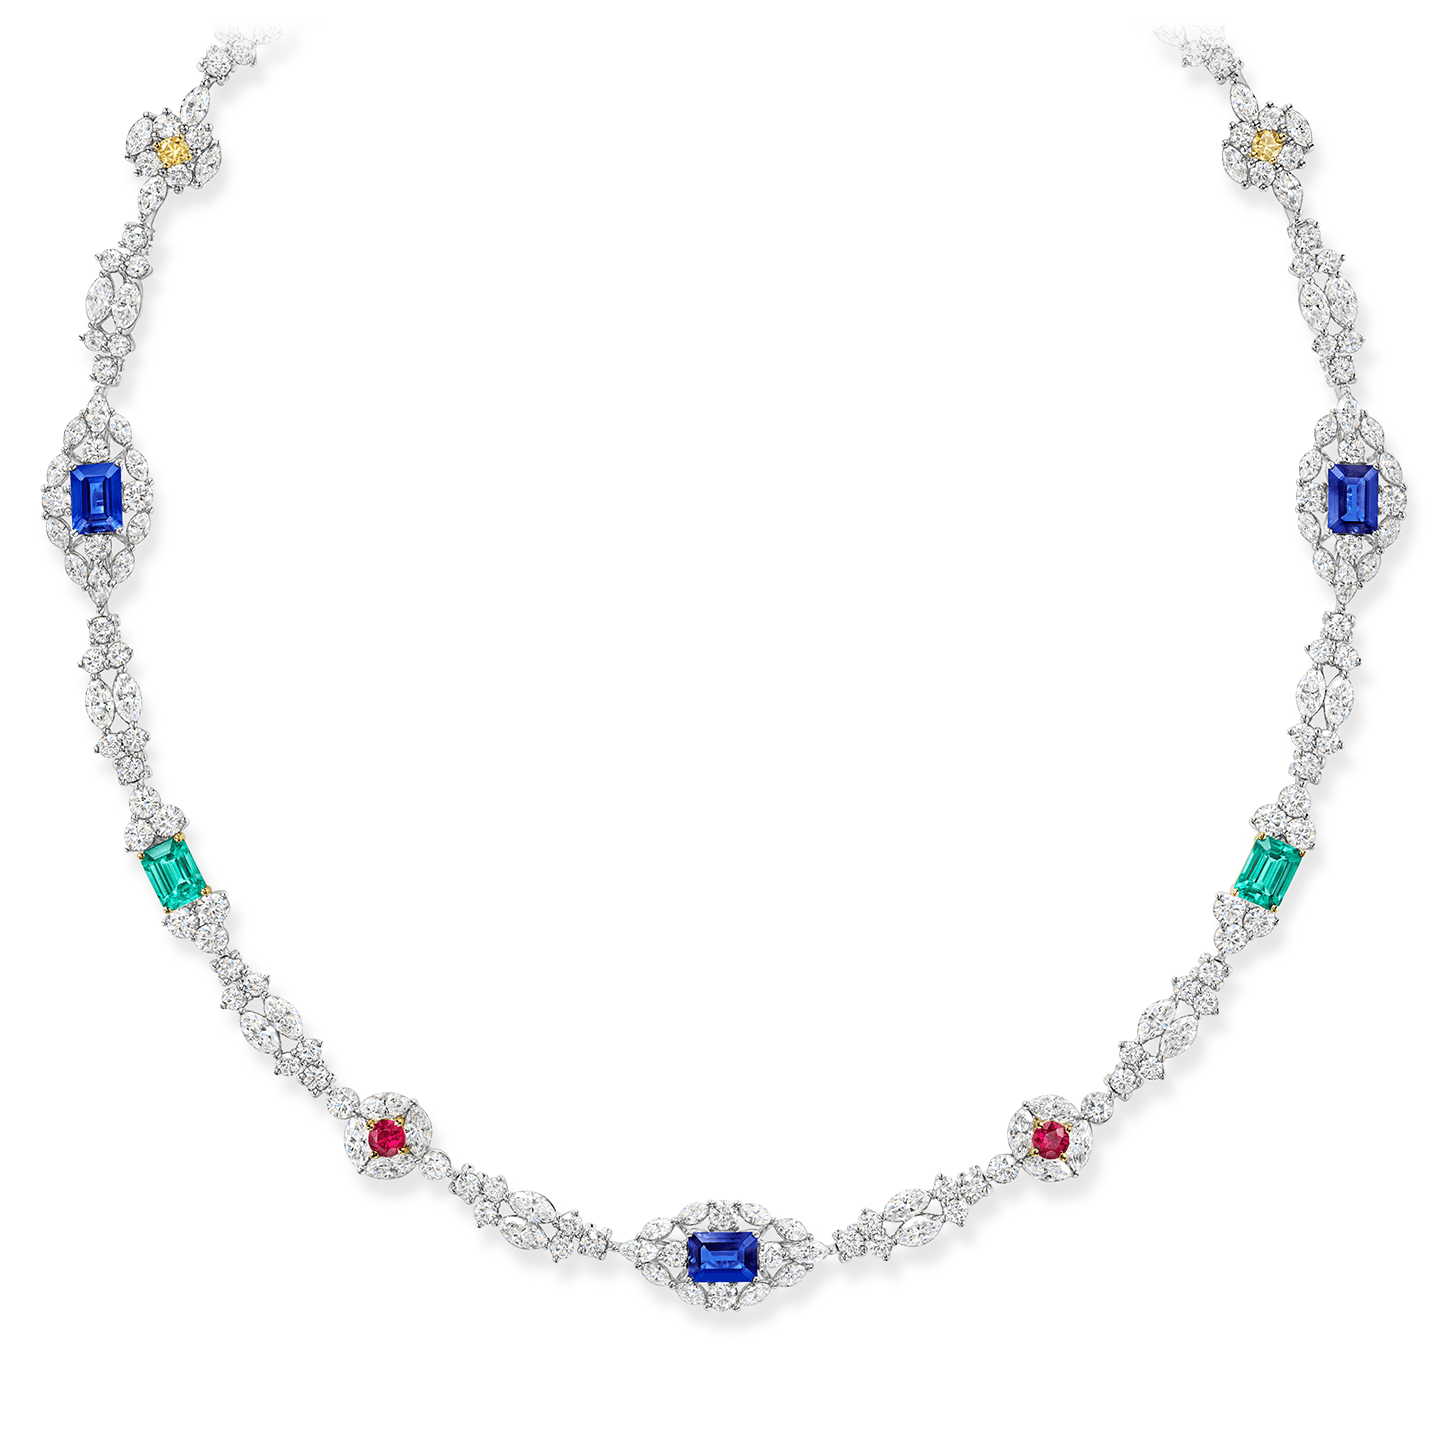 A necklace featuring 4 emerald-cut sapphires, 4 round rubies and 2 emerald-cut emeralds weighing a total of approximately 7.76 carats, with 2 round yellow diamonds and 204 marquise and round brilliant colorless diamonds, set in platinum and 18 karat yellow gold